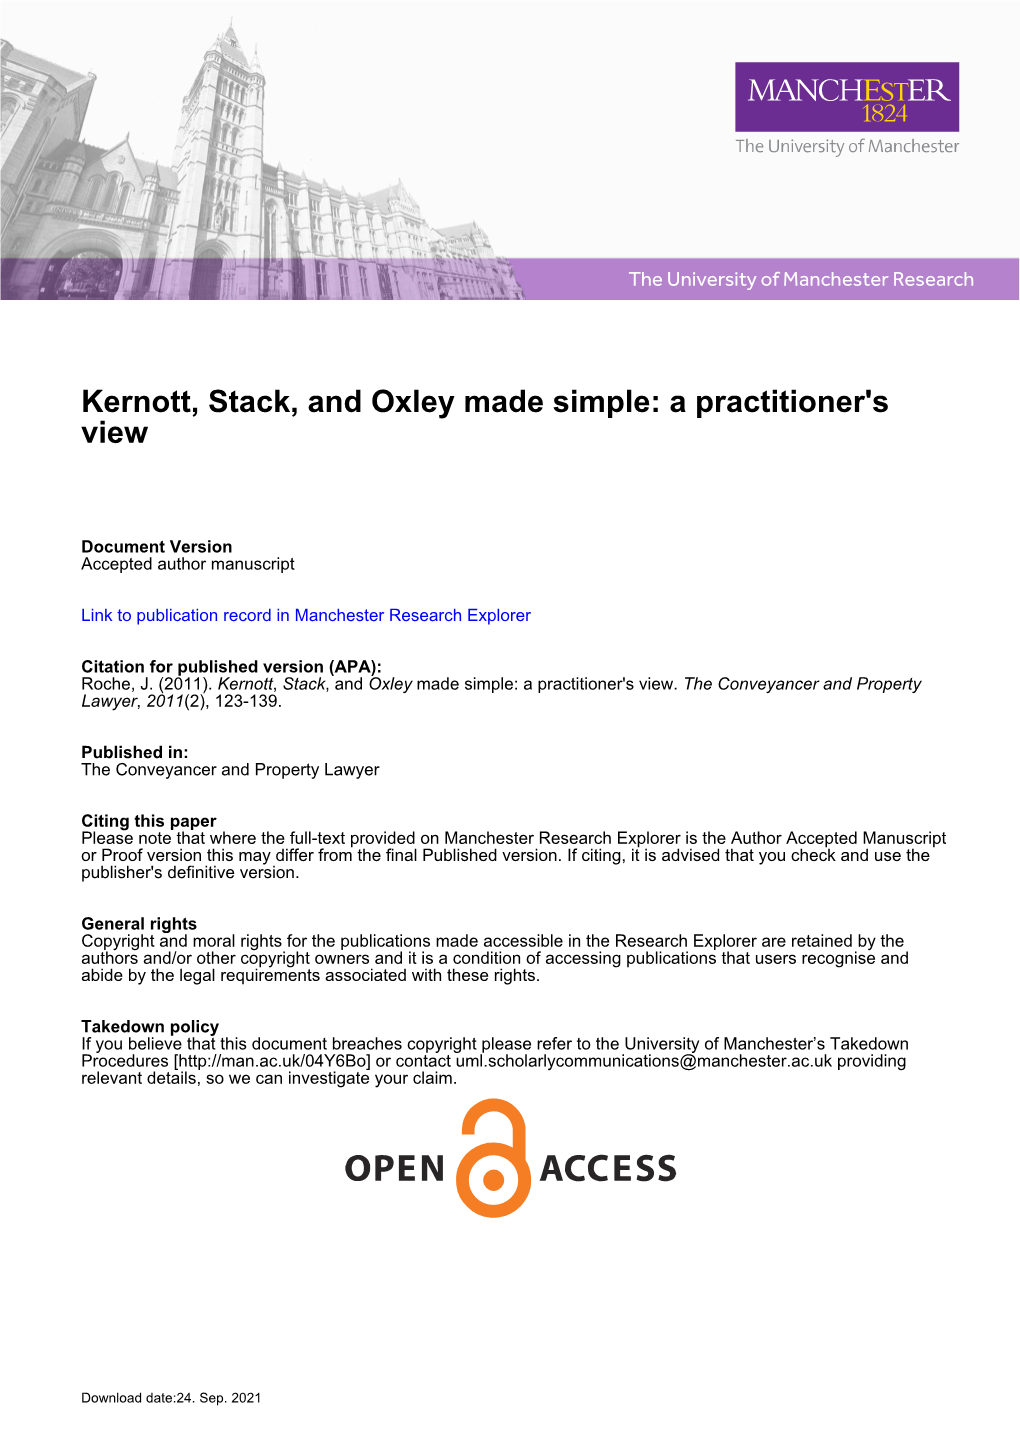 Kernott, Stack, and Oxley Made Simple: a Practitioner's View